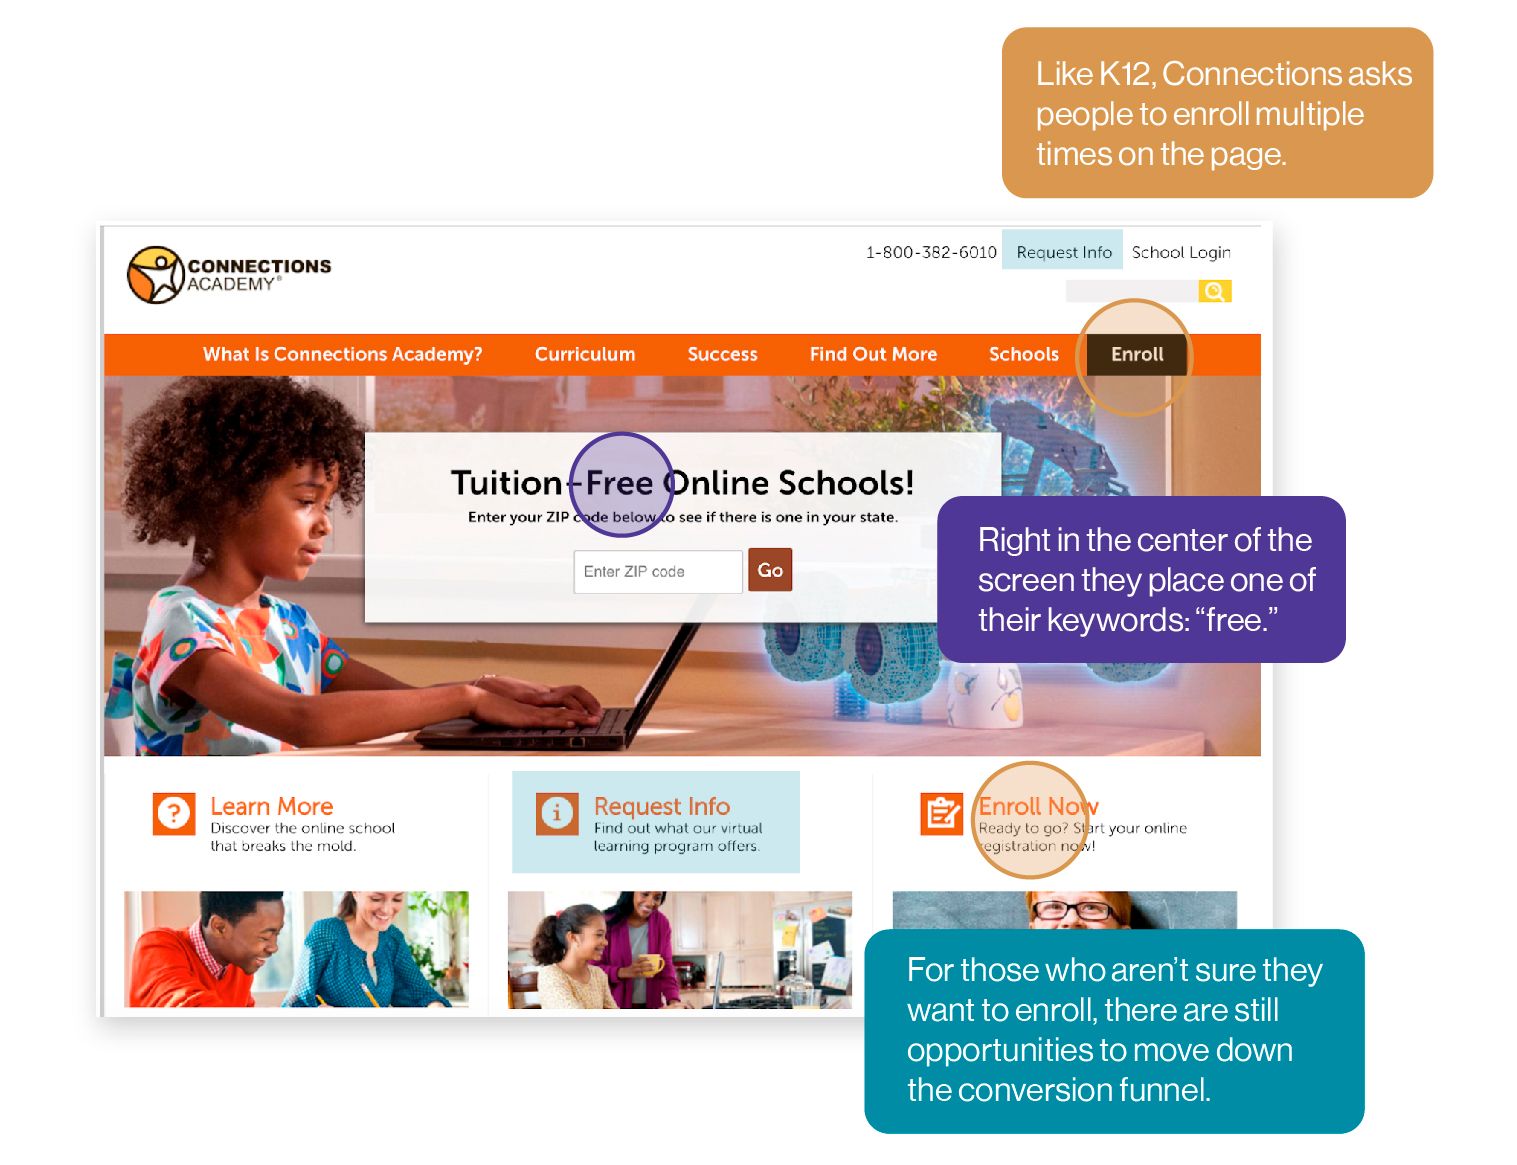 Image from Connections Academy website emphasizing the prominent use of the word 